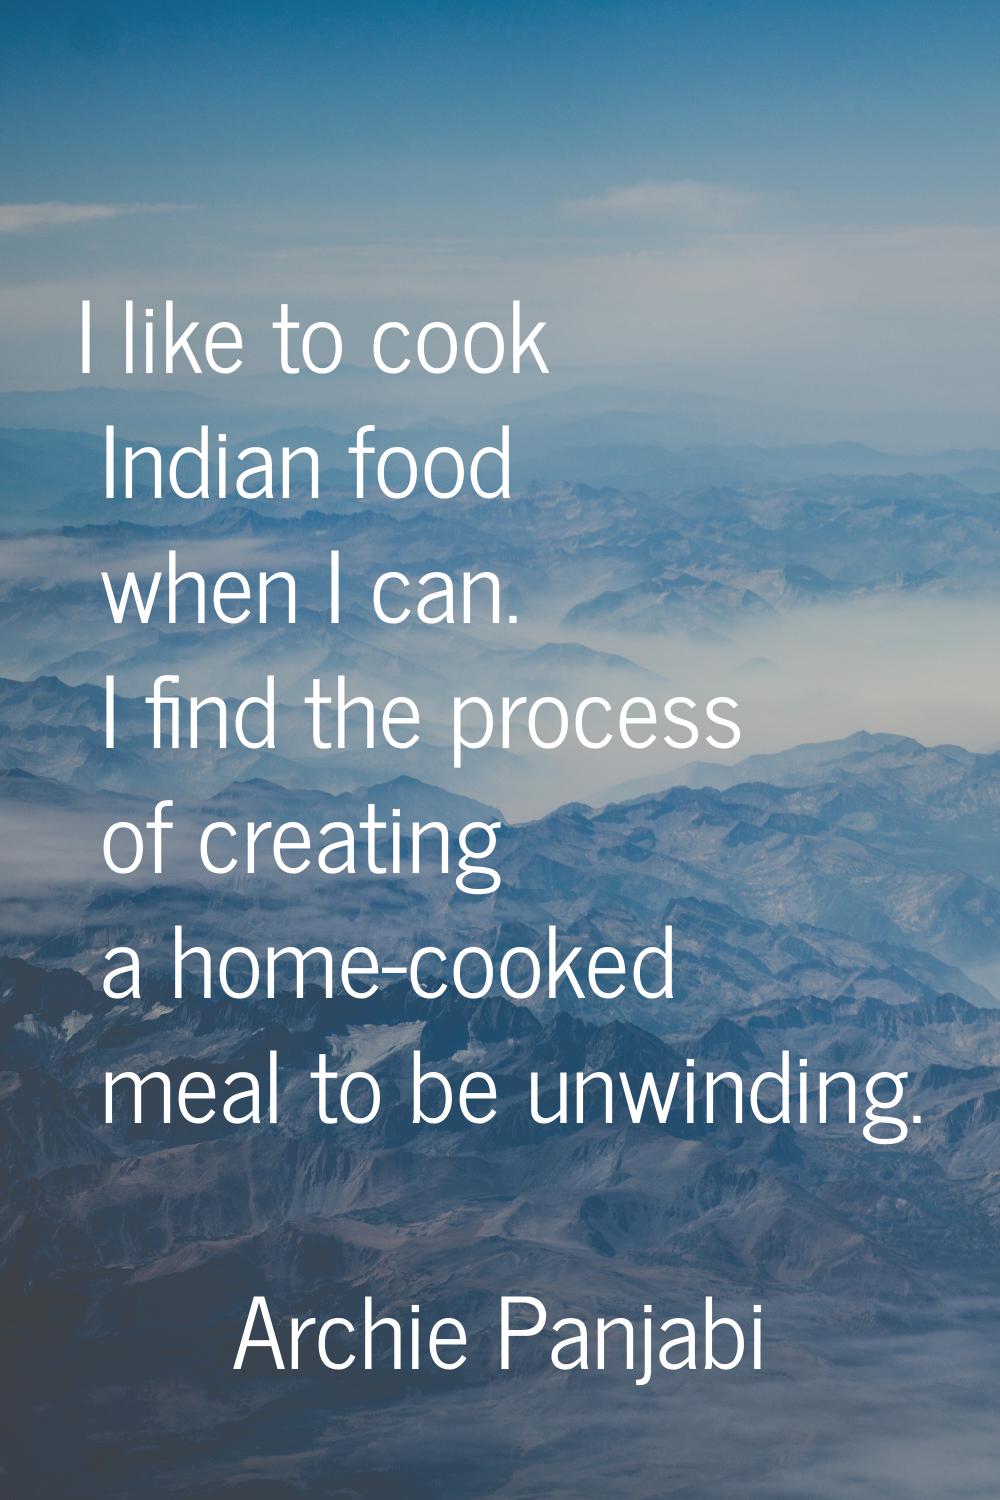 I like to cook Indian food when I can. I find the process of creating a home-cooked meal to be unwi